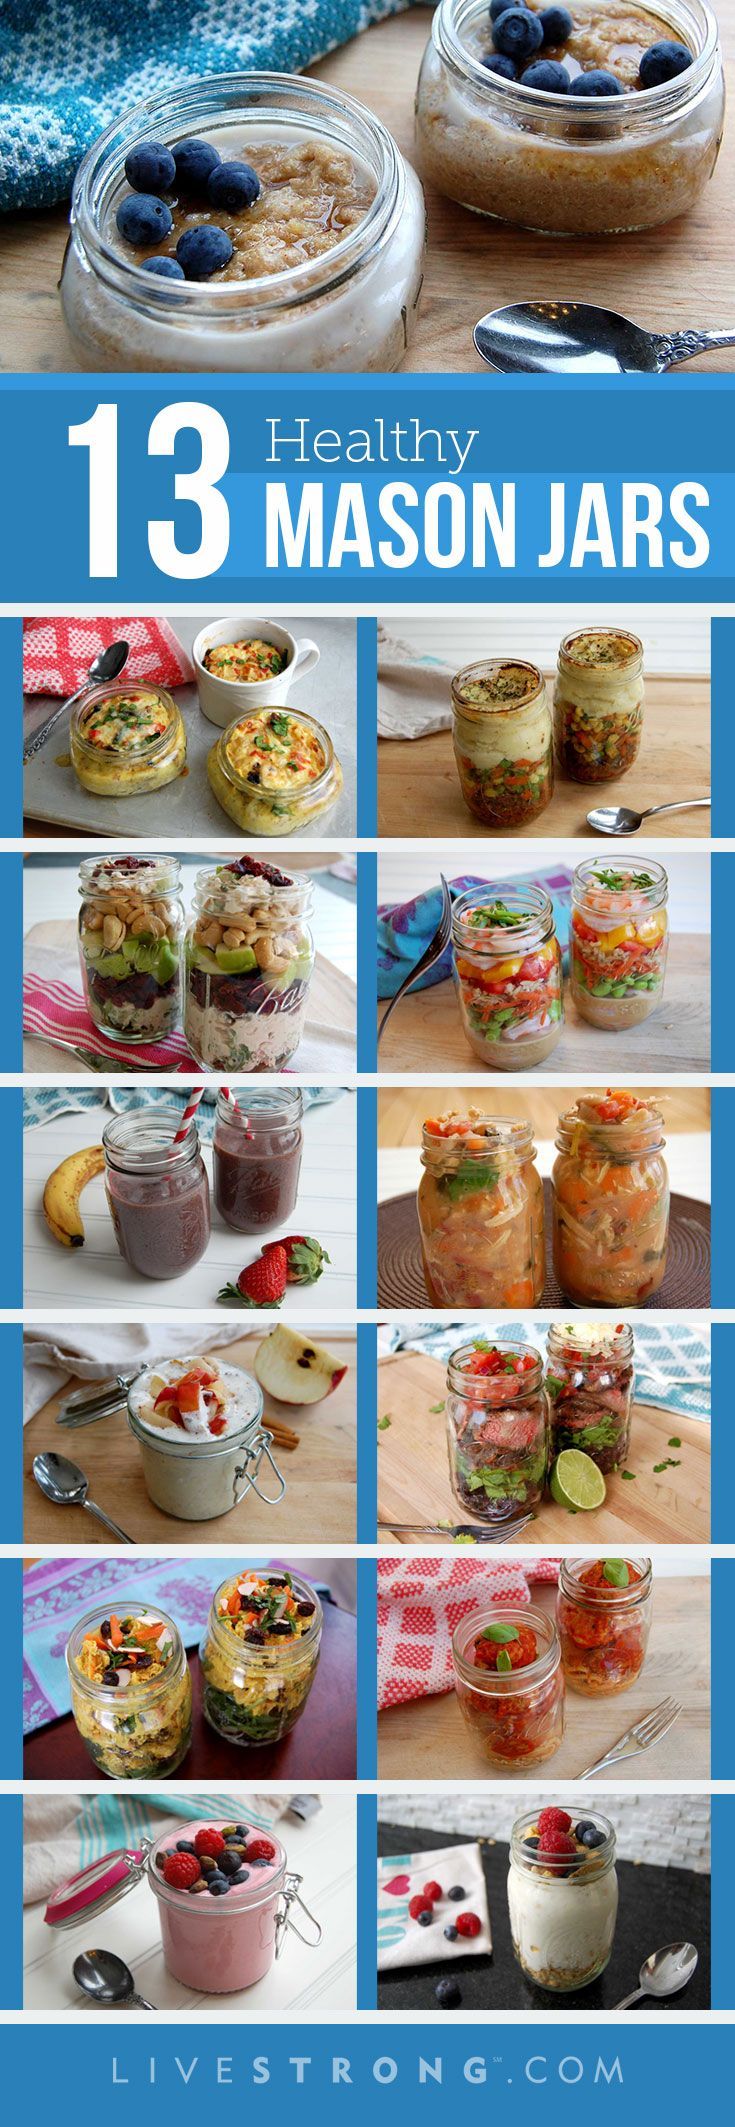 13 Healthy Mason Jar Meals (Don't Leave Home Without Them -   13 healthy recipes Snacks mason jars ideas